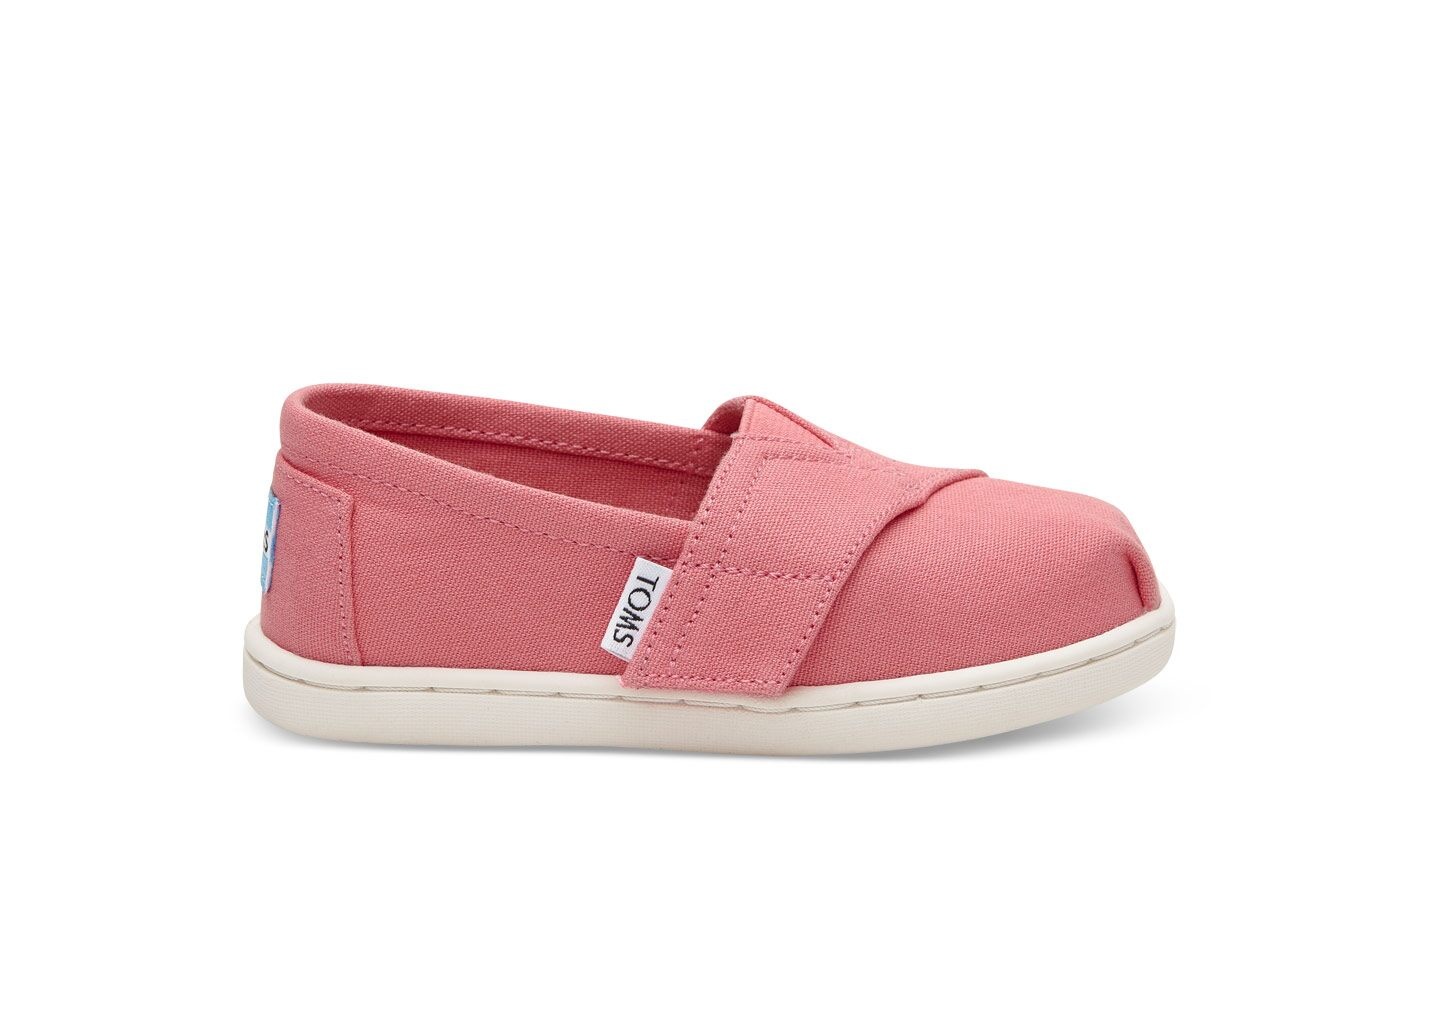 toms childrens shoes